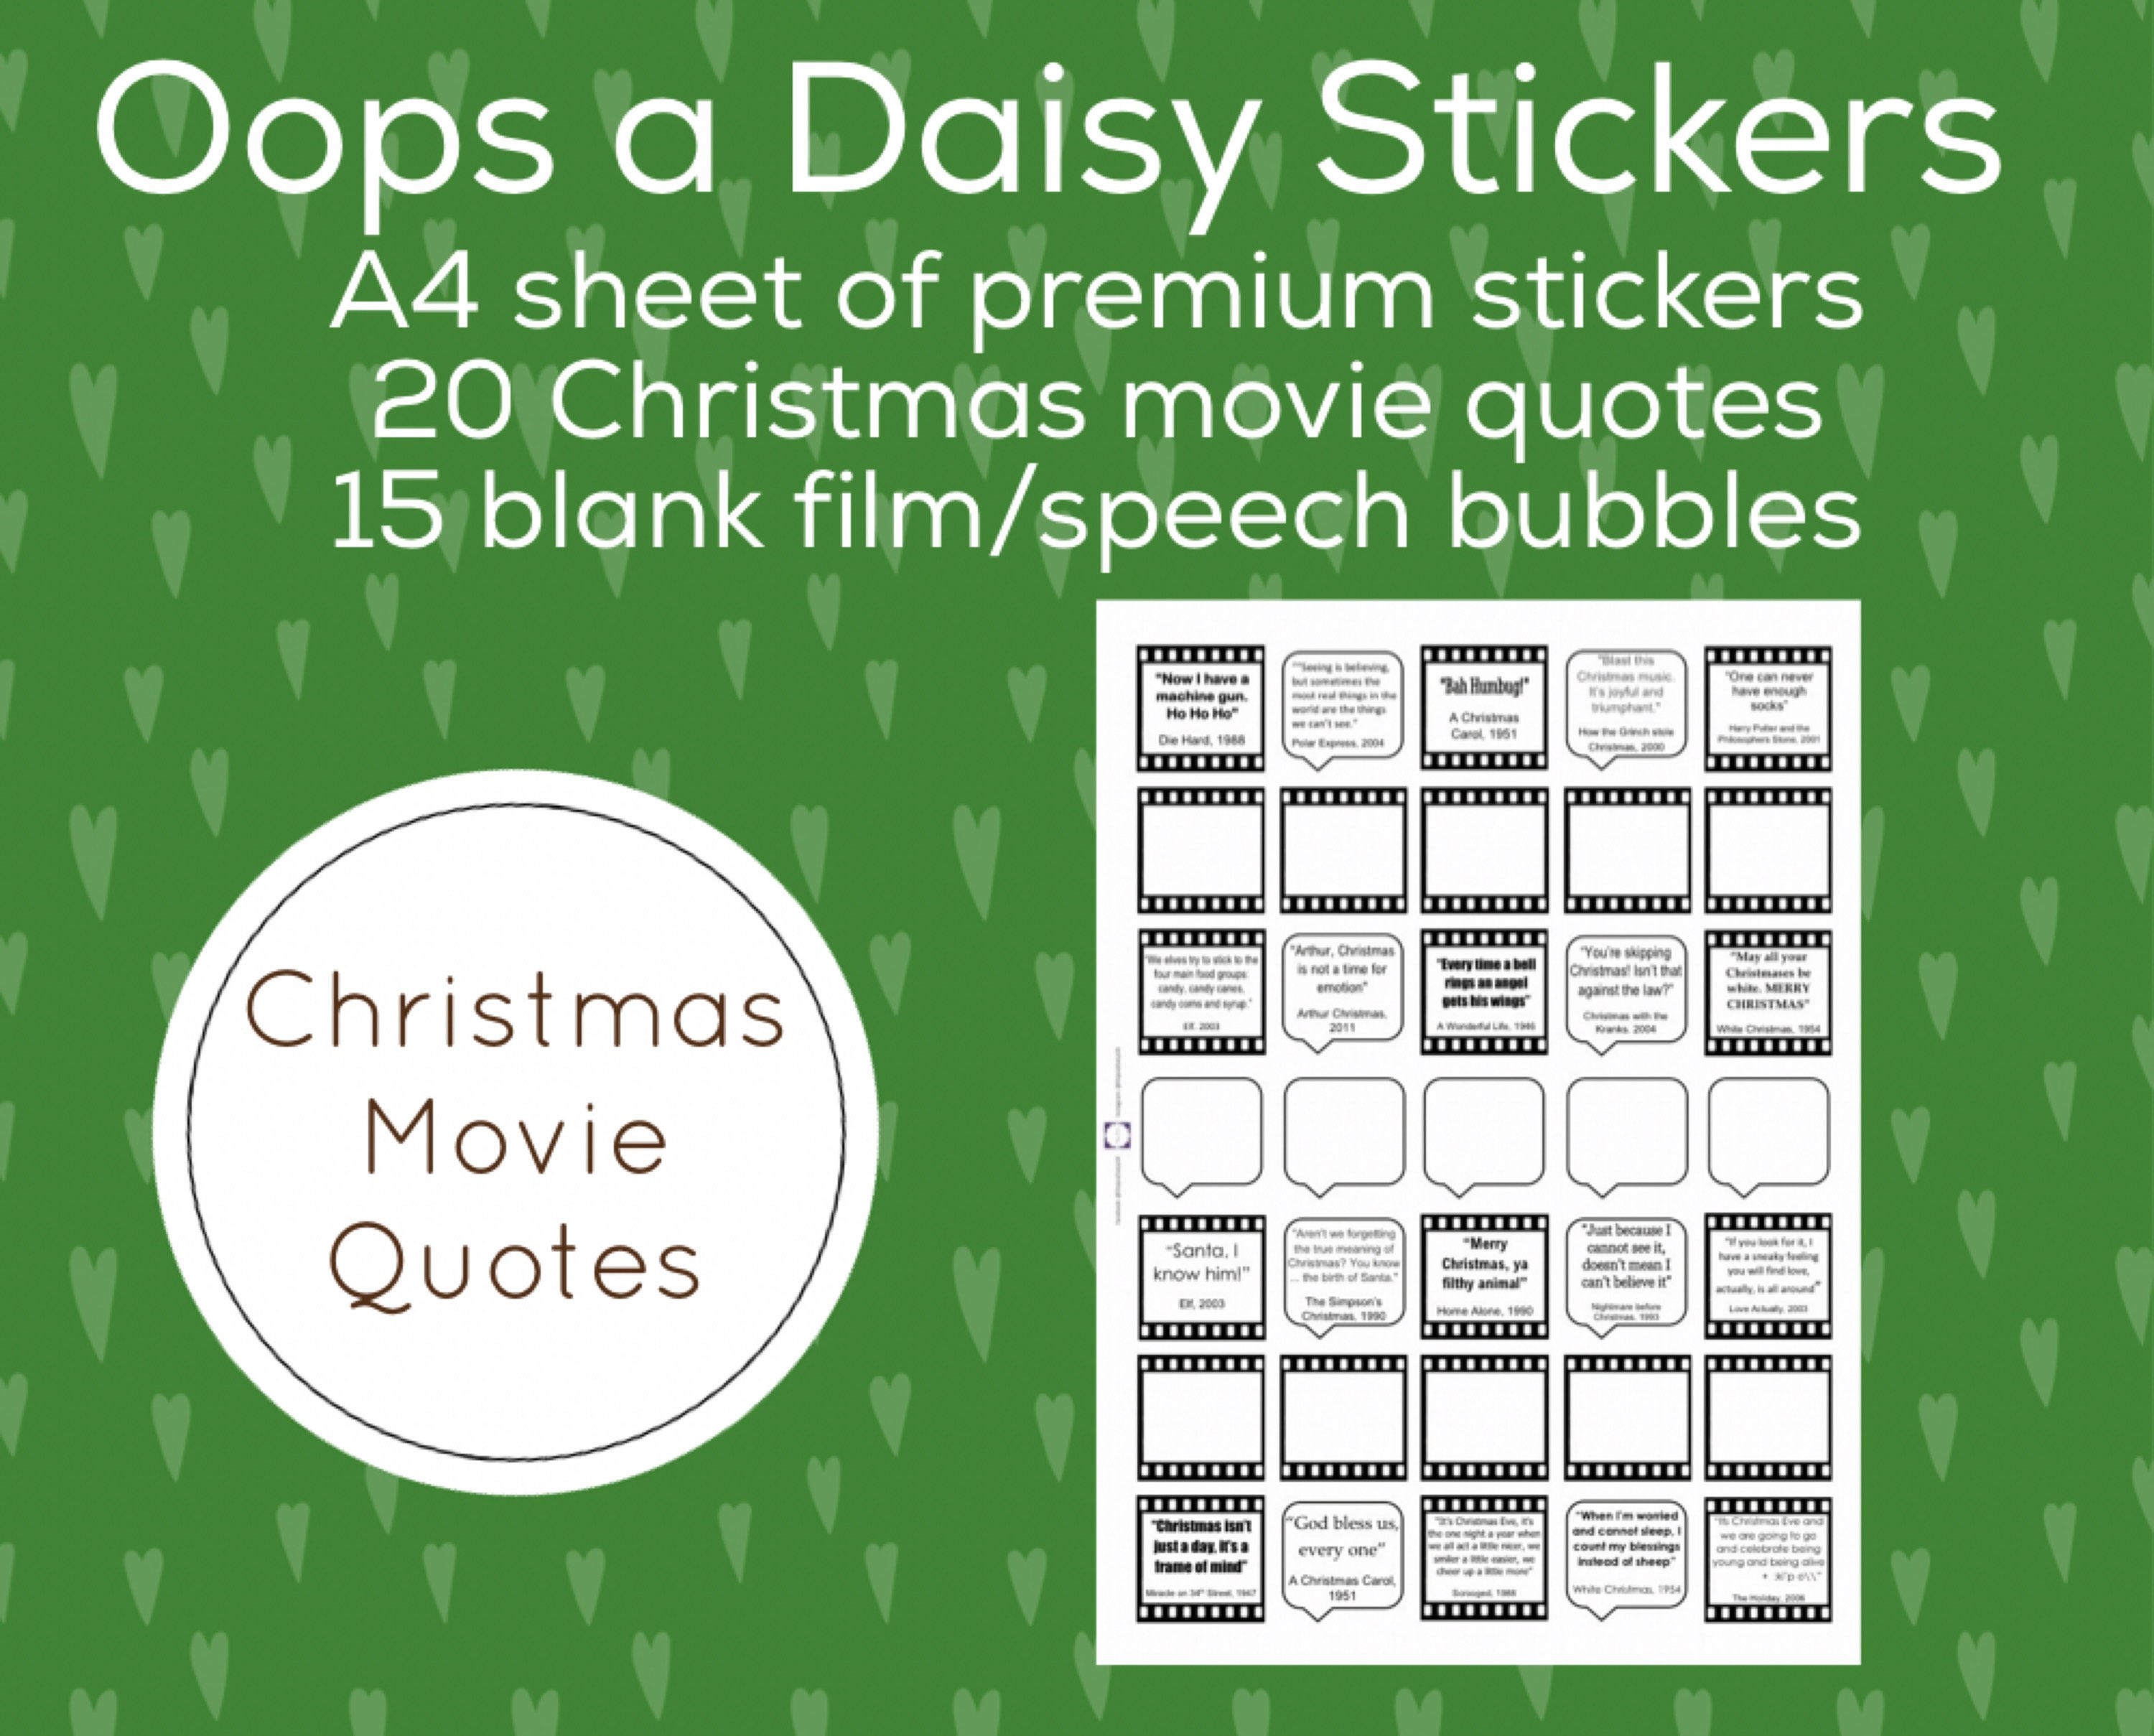 Christmas Movie Quotes
 Oops a Daisy Christmas movie quotes stickers for